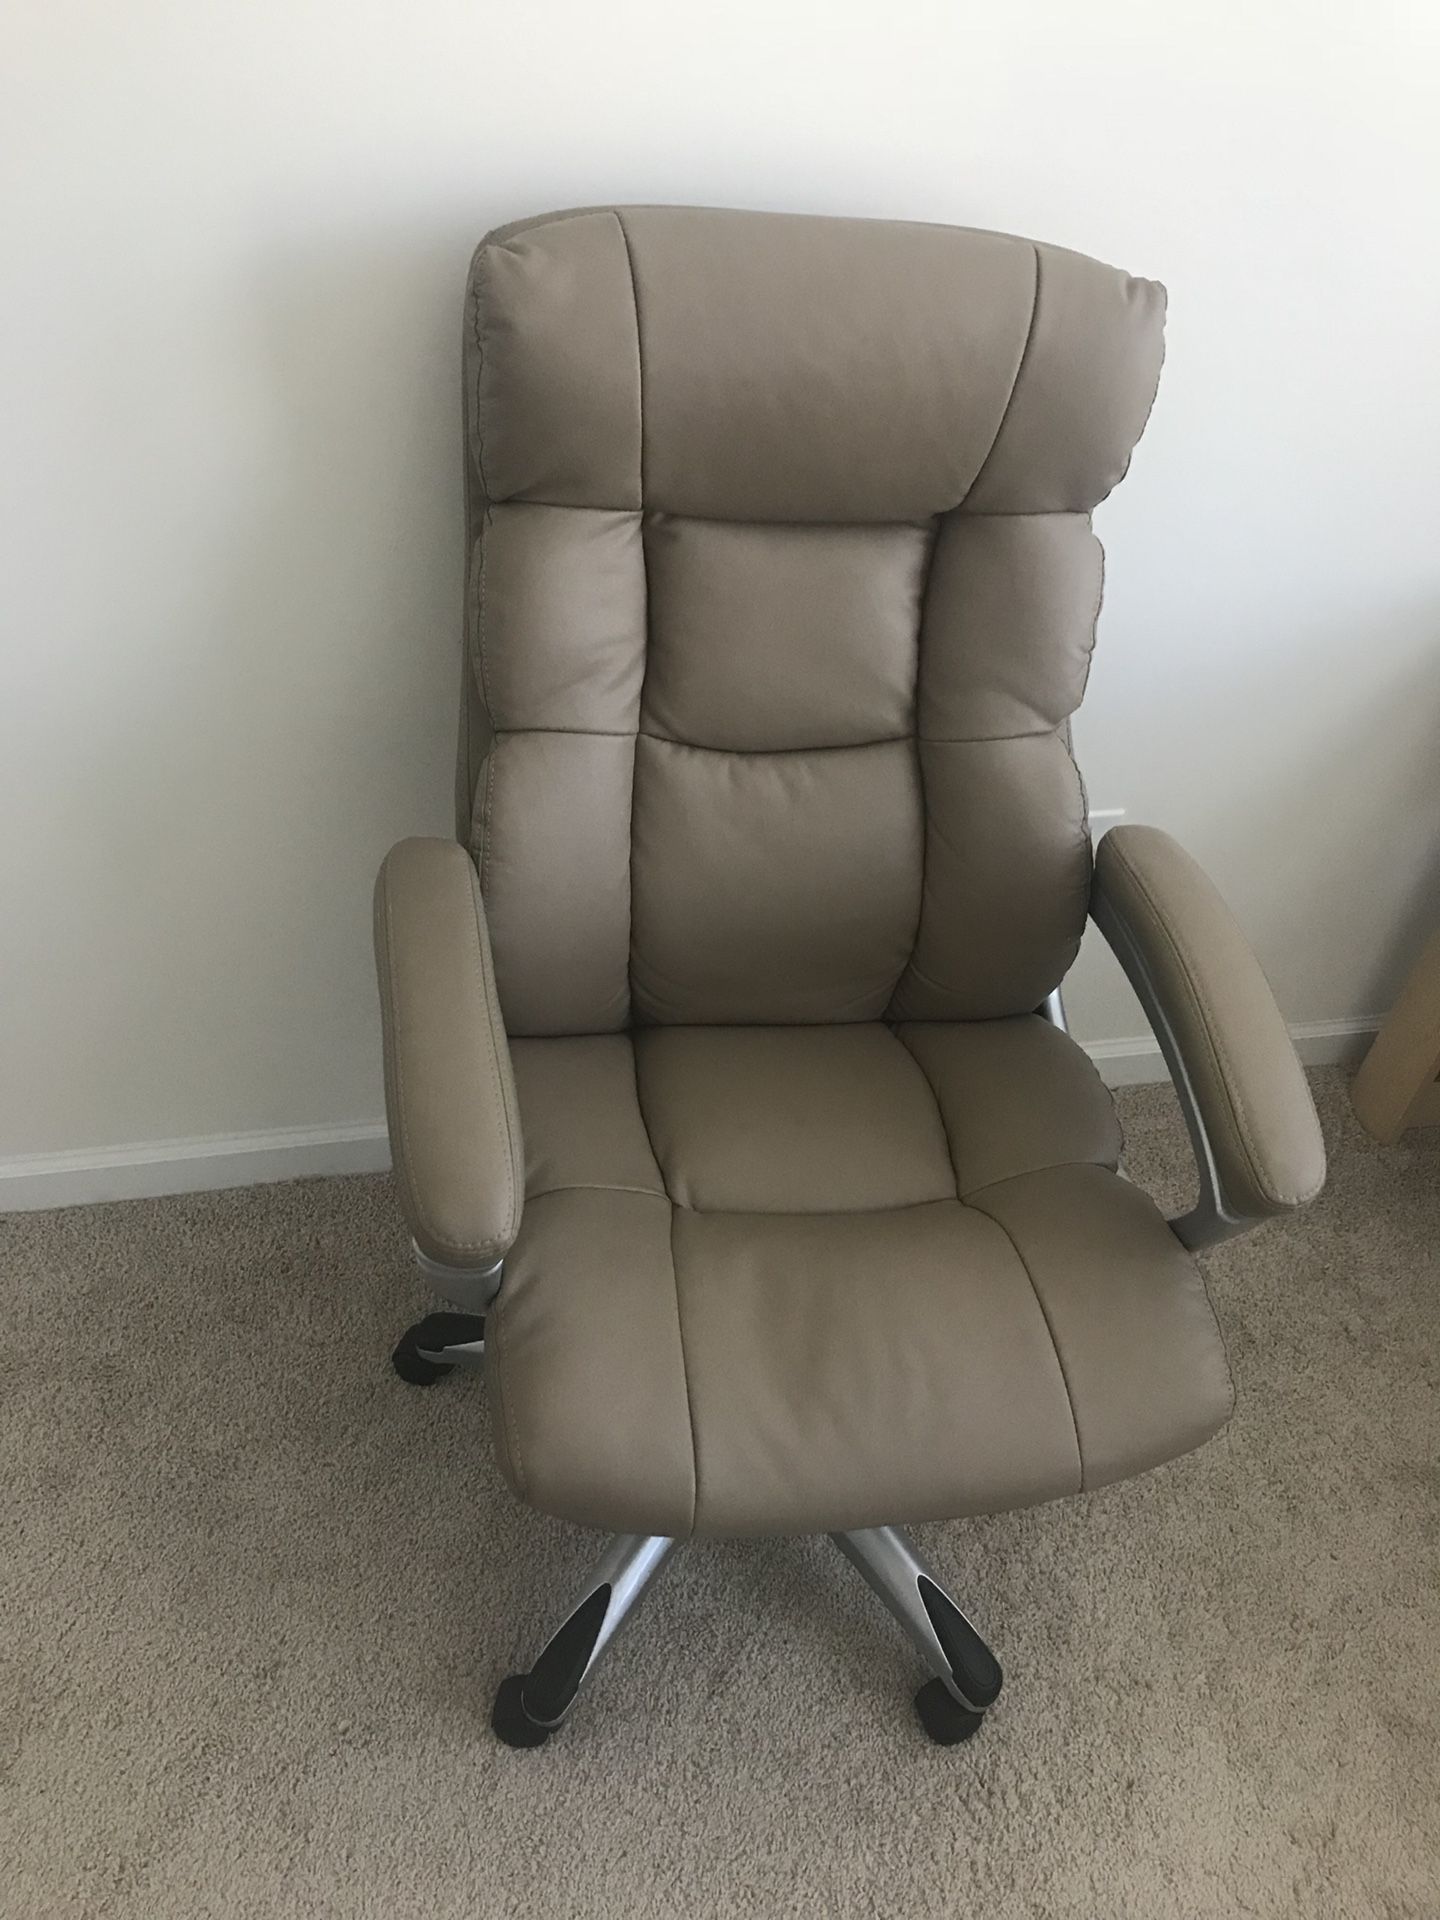 $100 - Office / Manager Chair - LIKE NEW!